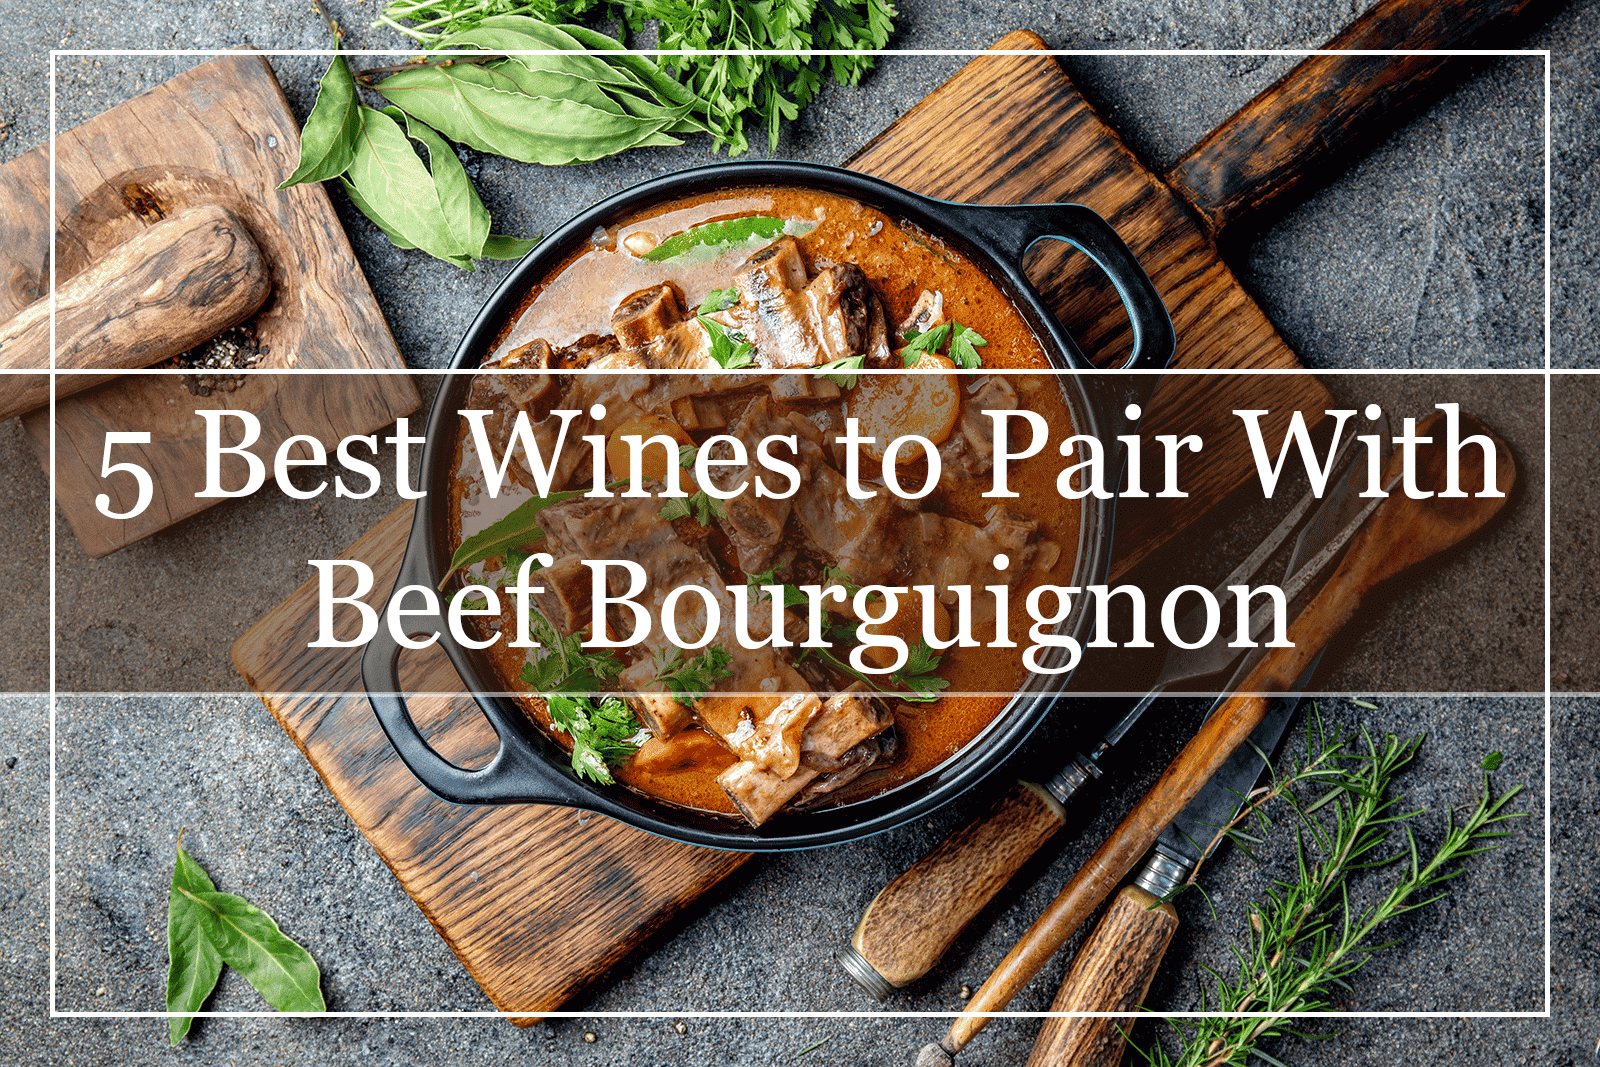 5 Best Wines to Pair With Beef Bourguignon (2022)